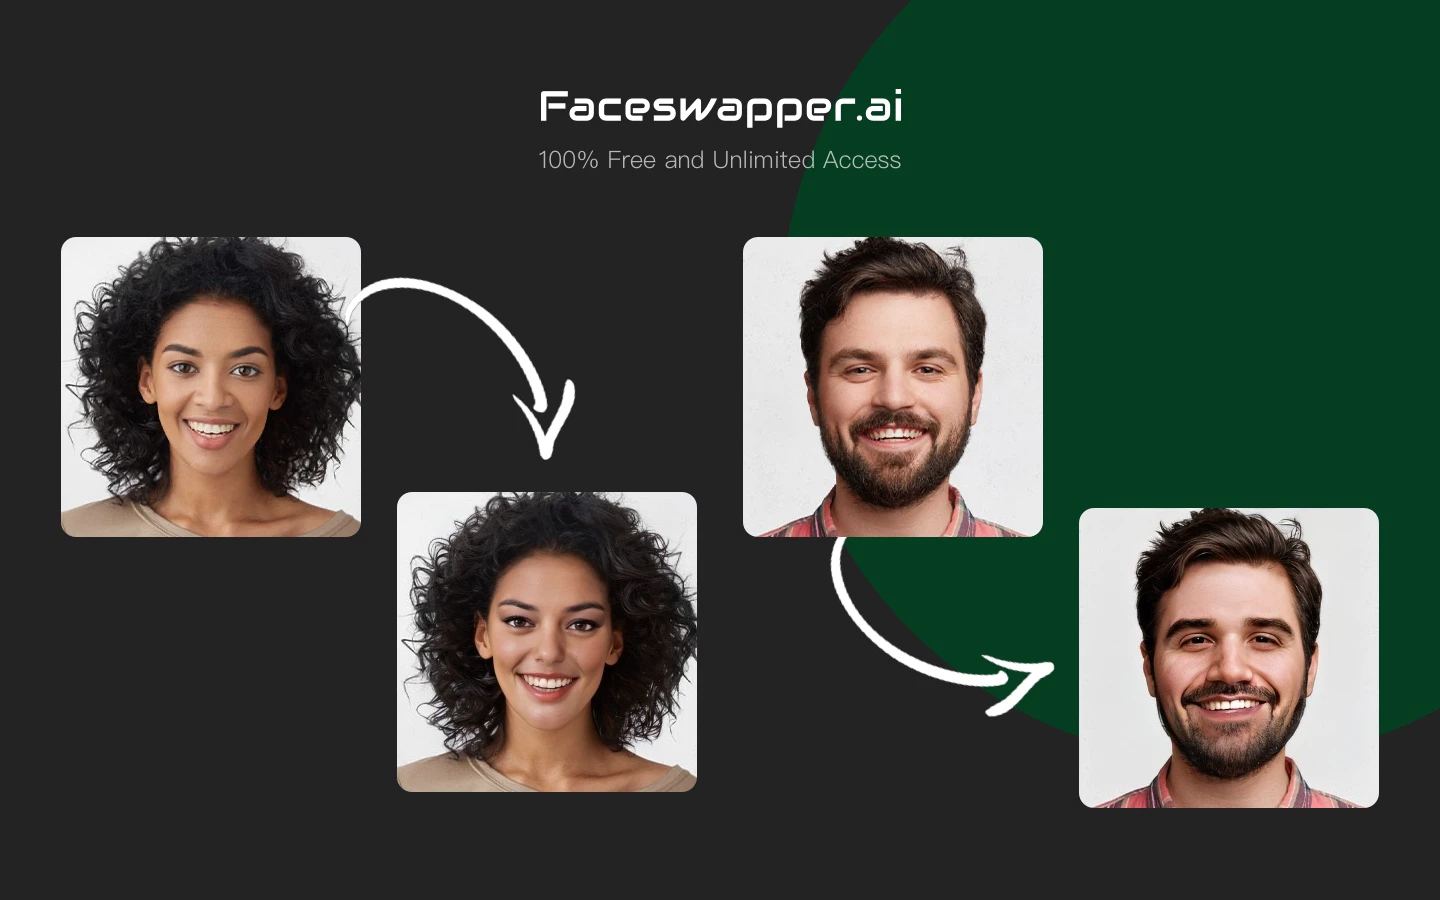 Face Swapper – Replace your face to make jokes that go too far